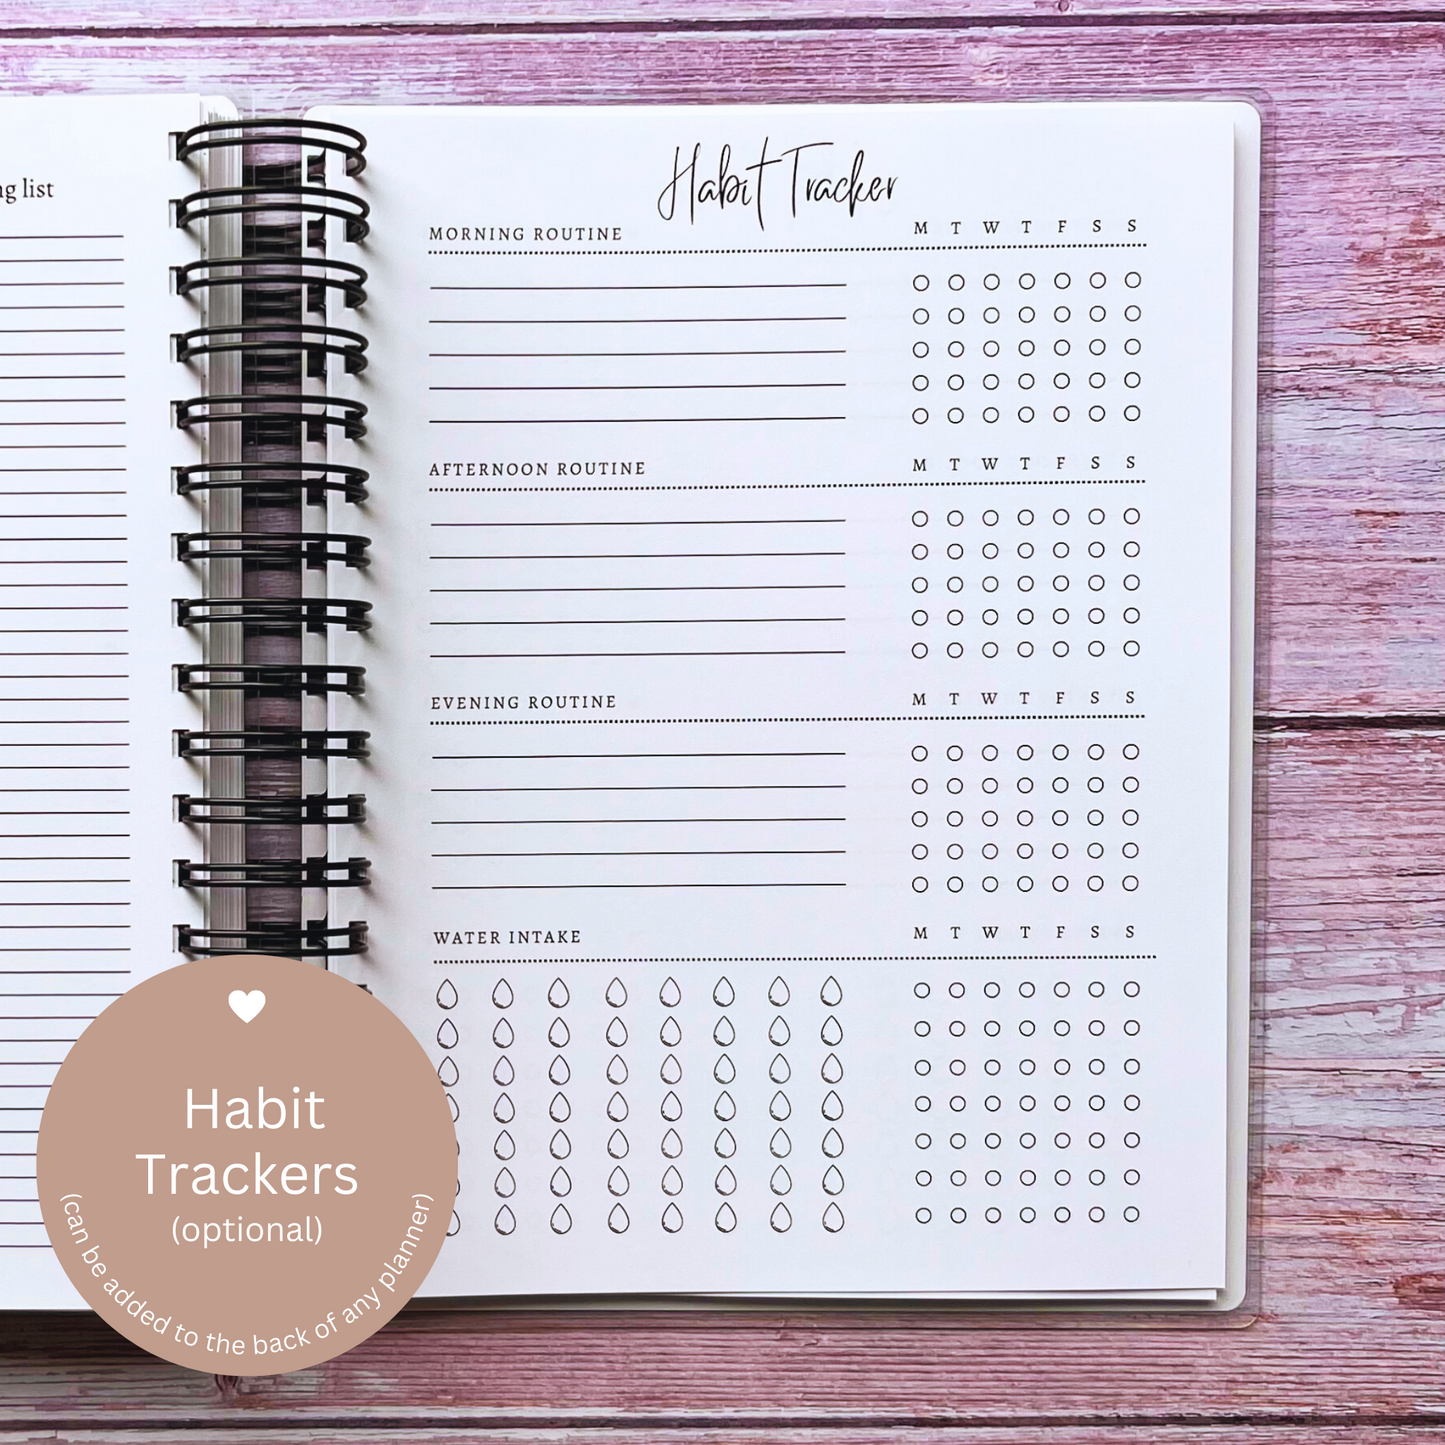 Personalized Weekly Planner | Mystical Moth